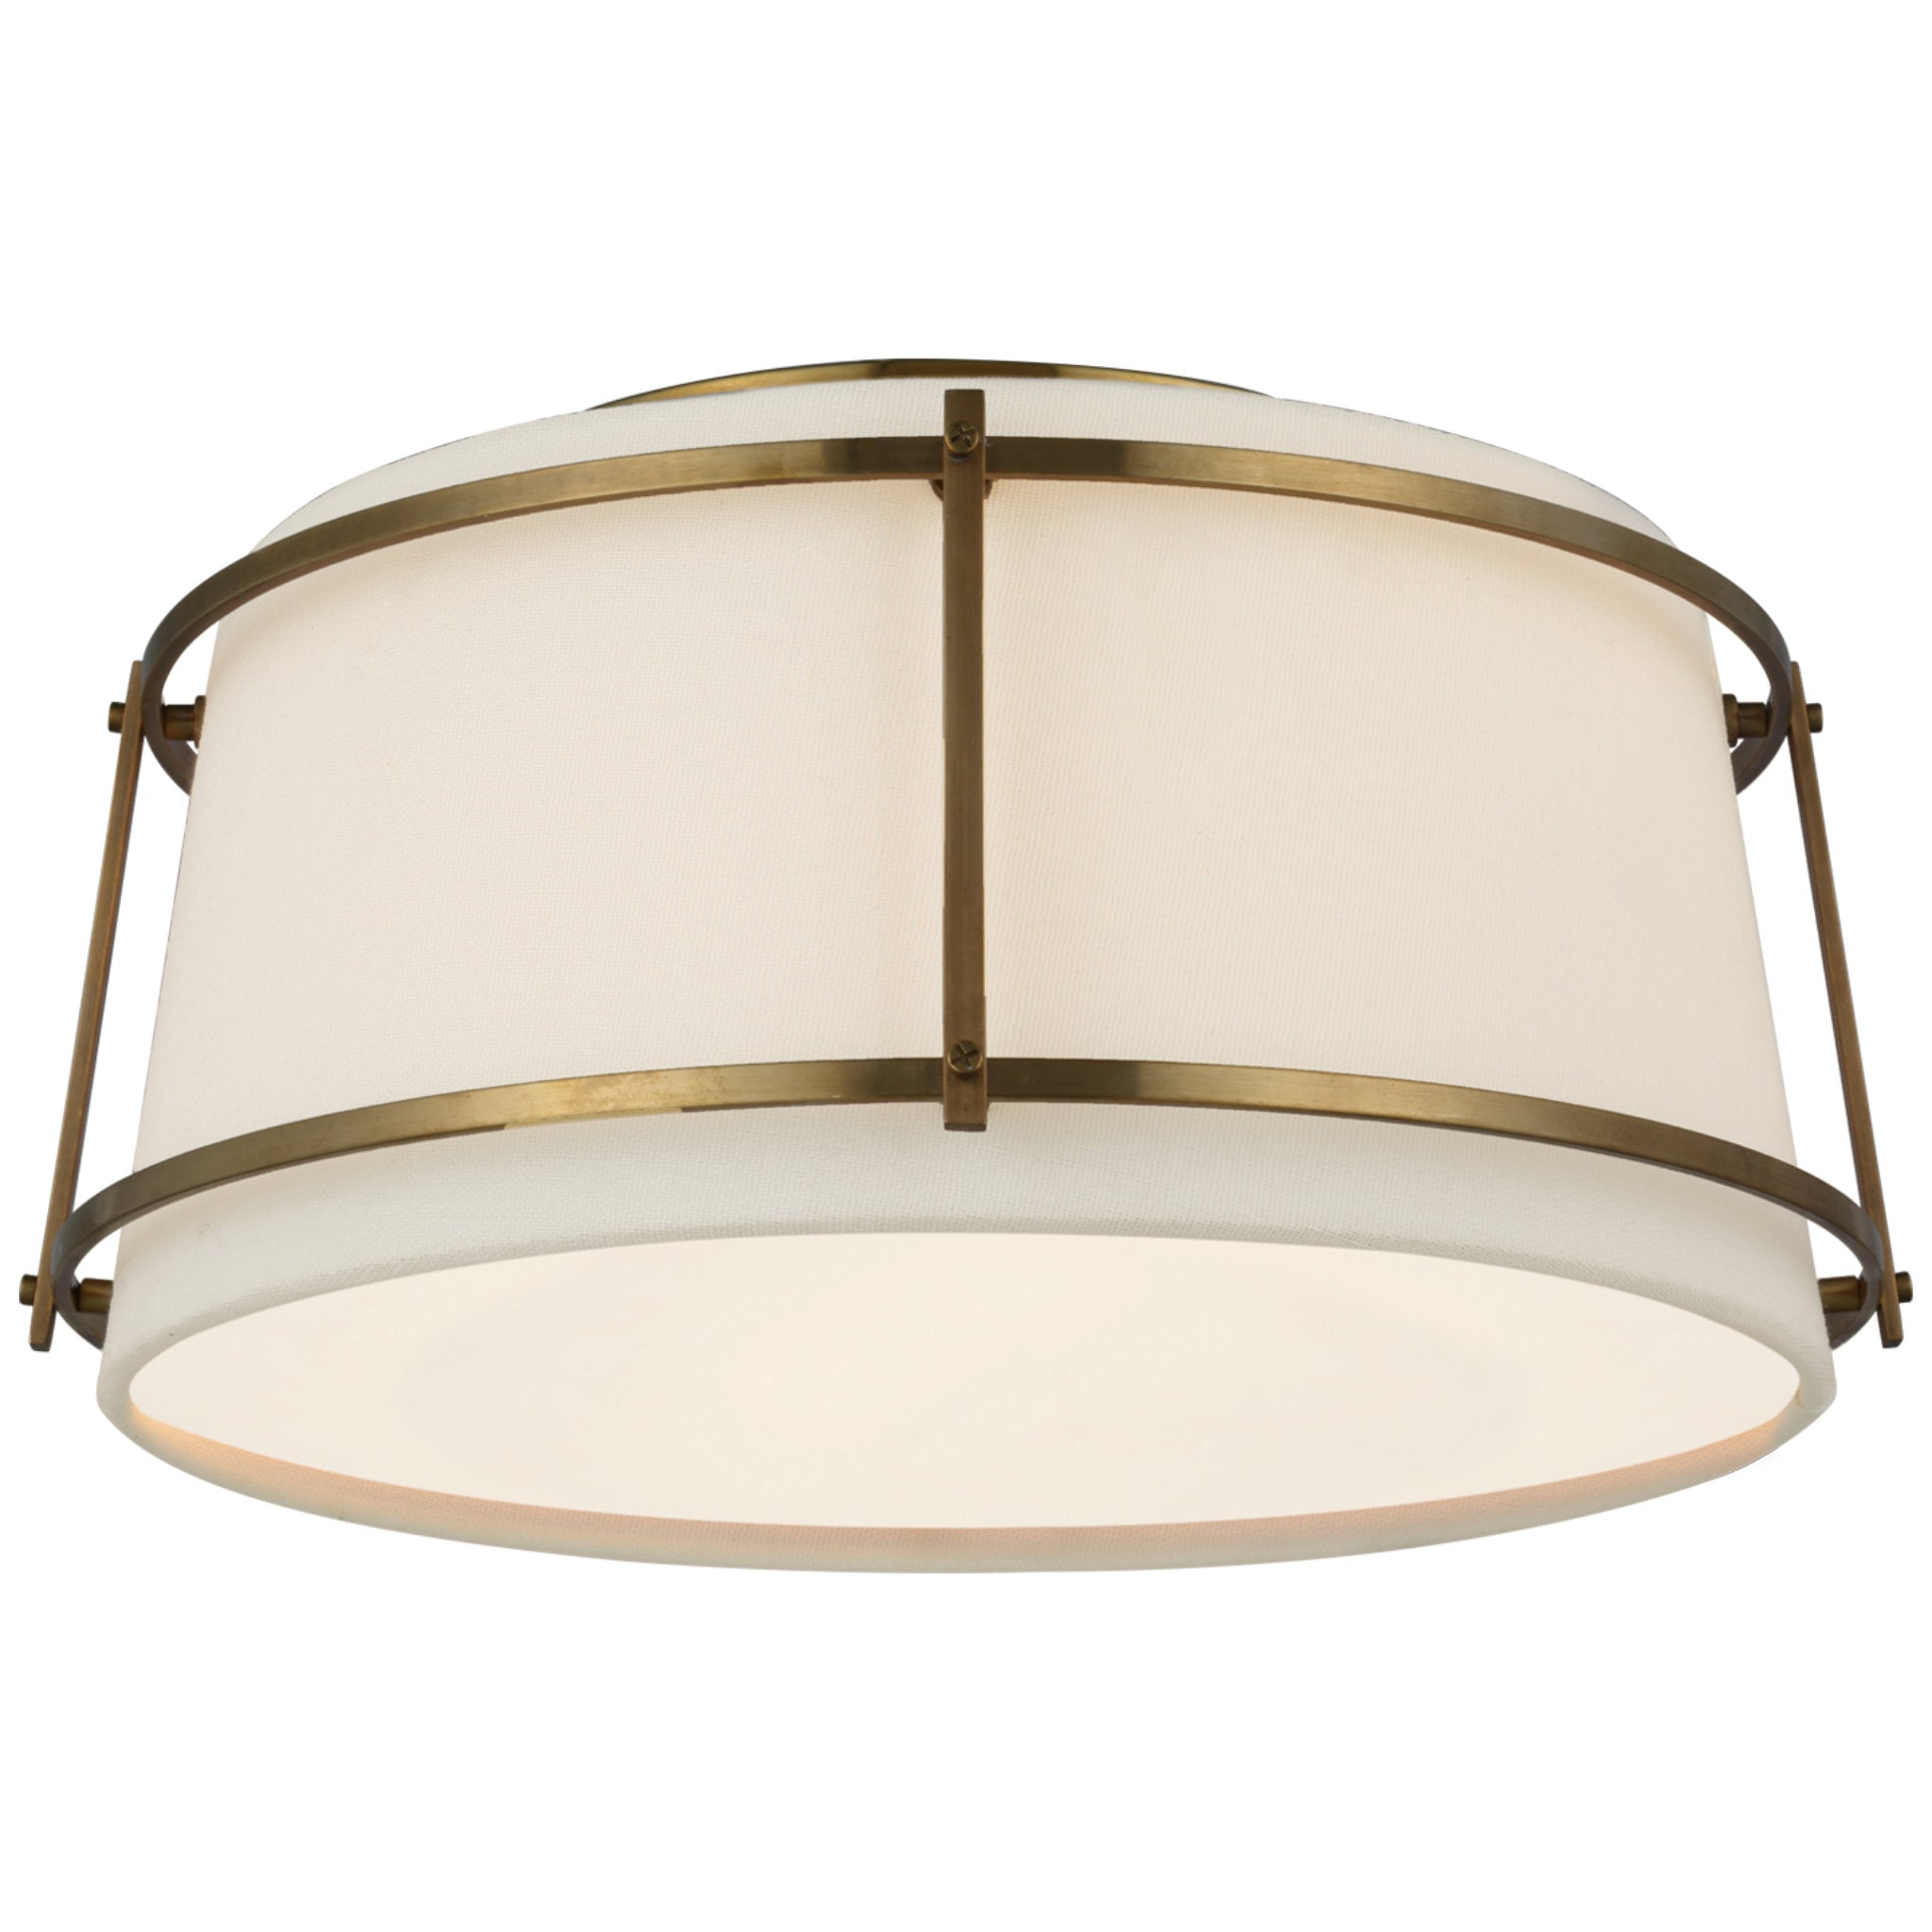 Carrier and Company Callaway Small Flush Mount in Hand-Rubbed Antique Brass with Linen Shade and Frosted Acrylic Diffuser